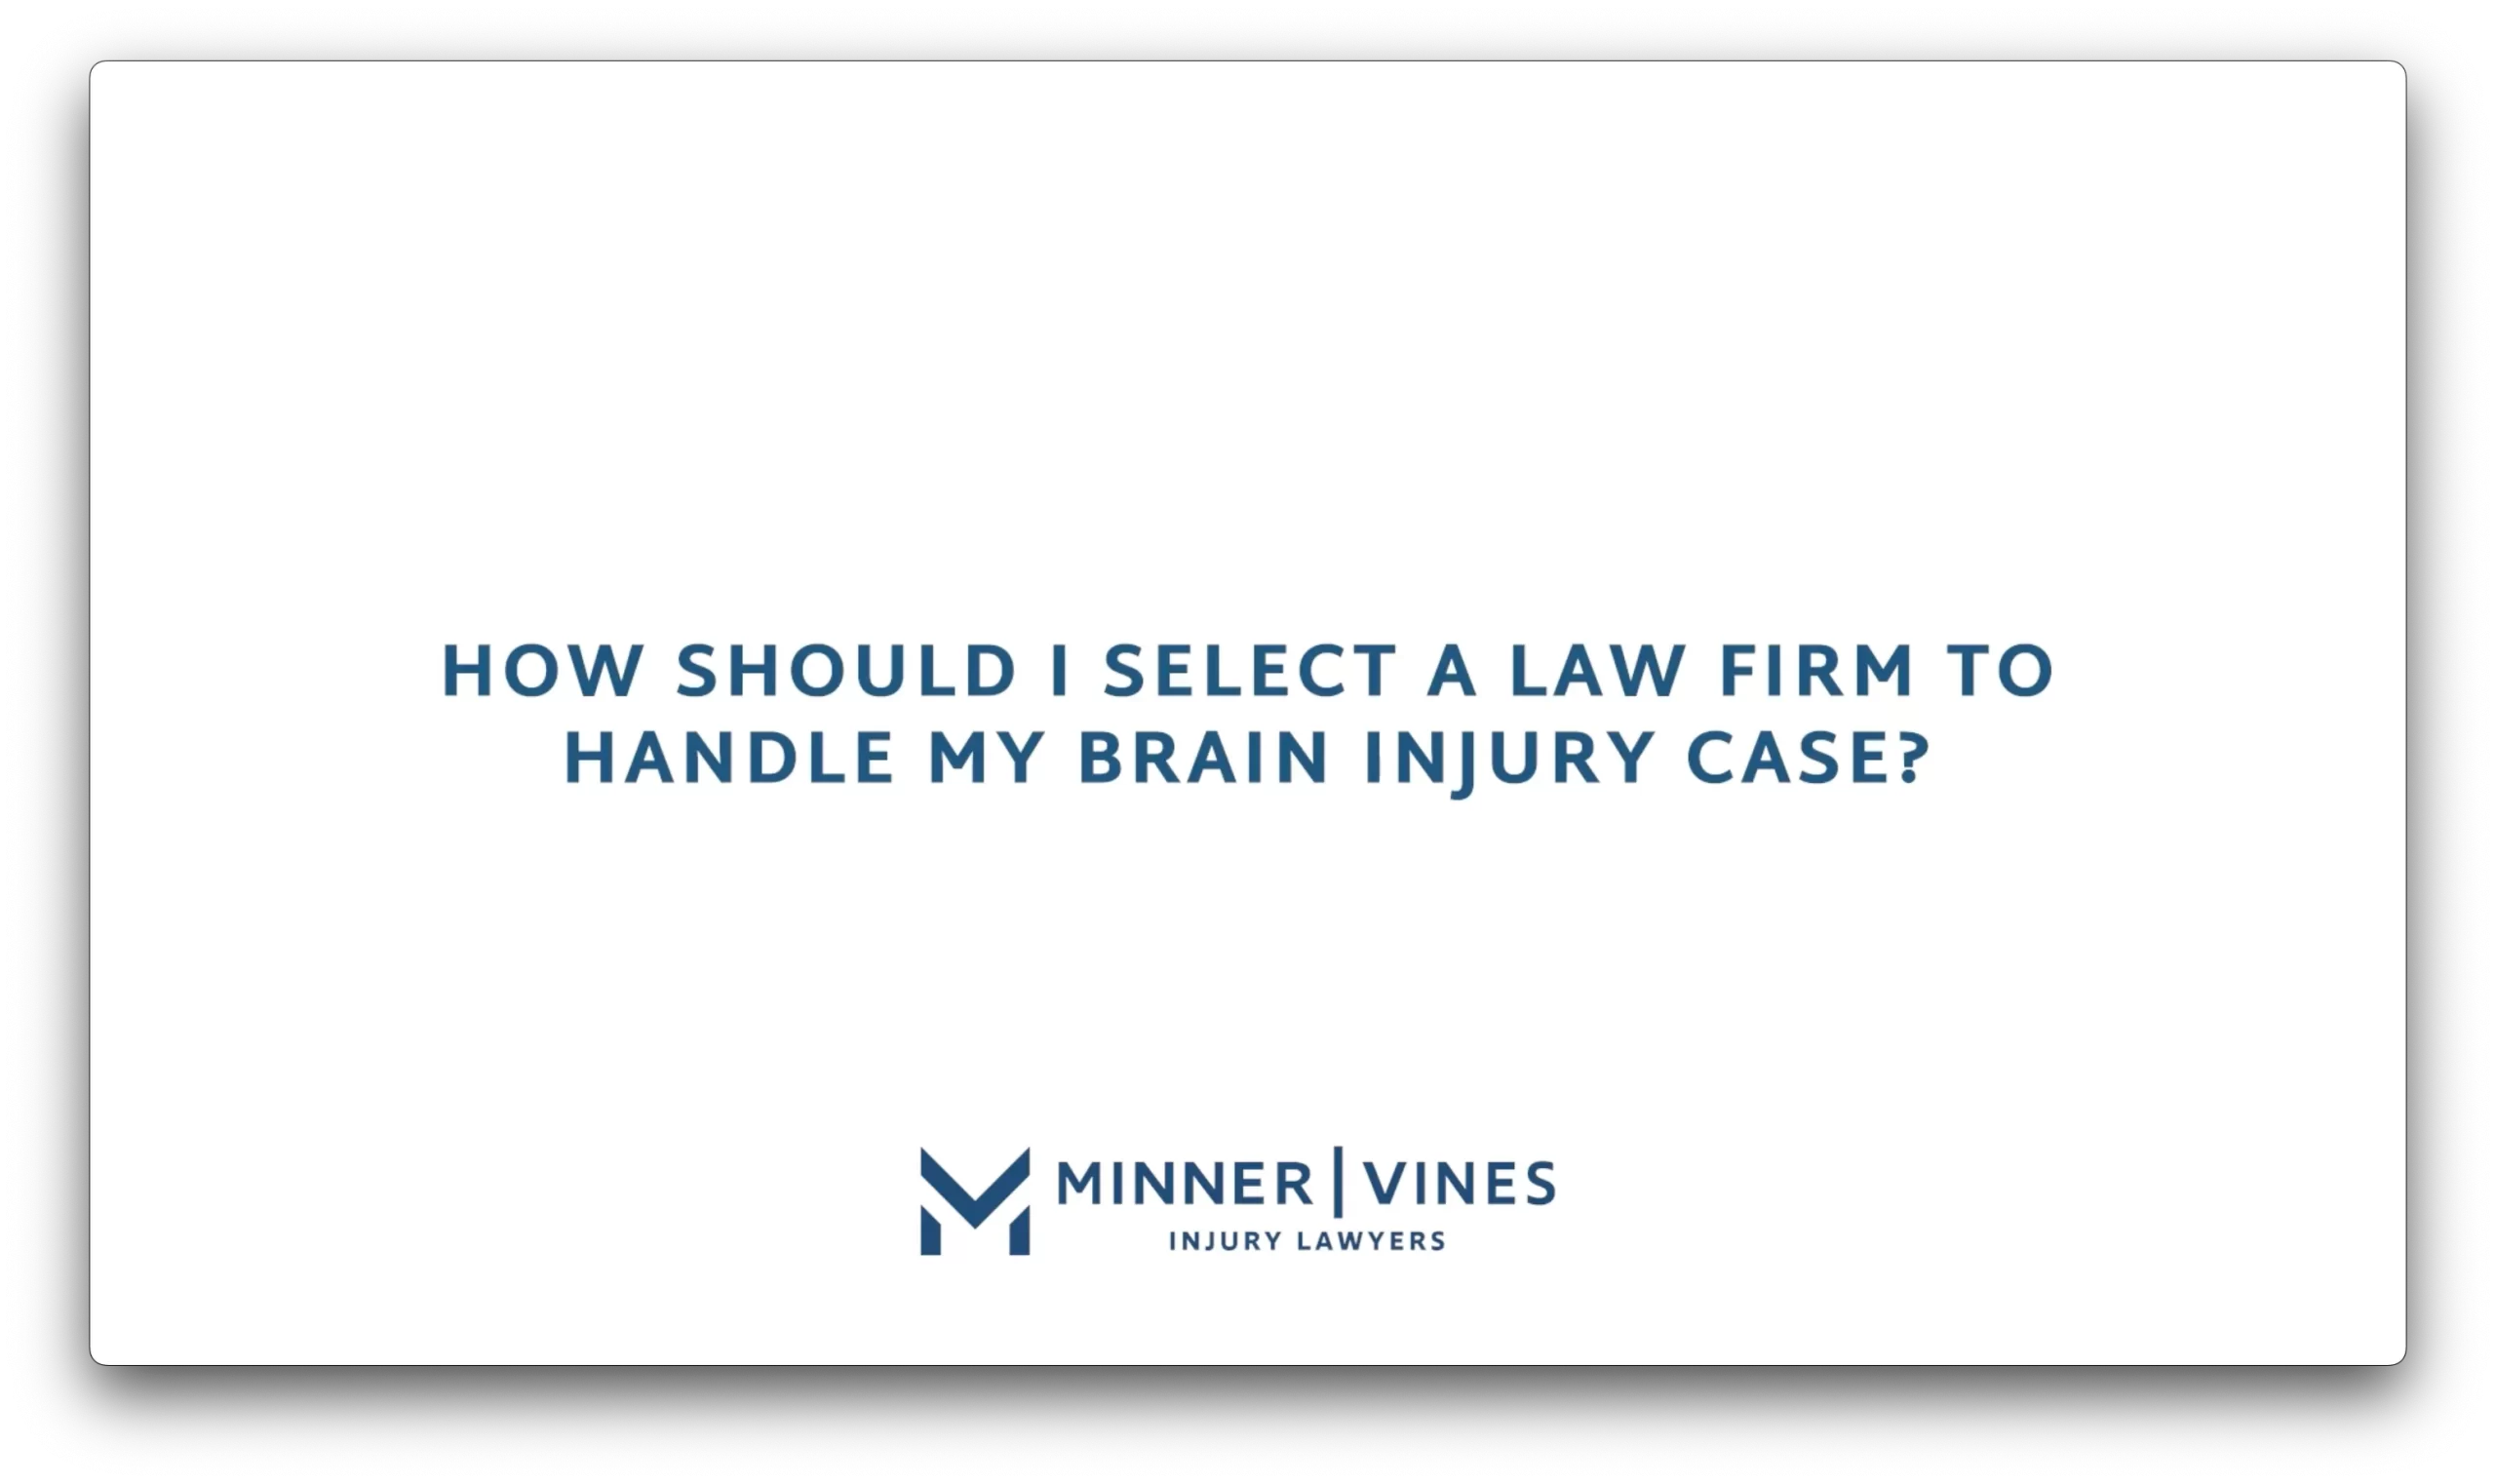 How should I select a law firm to handle my brain injury case?